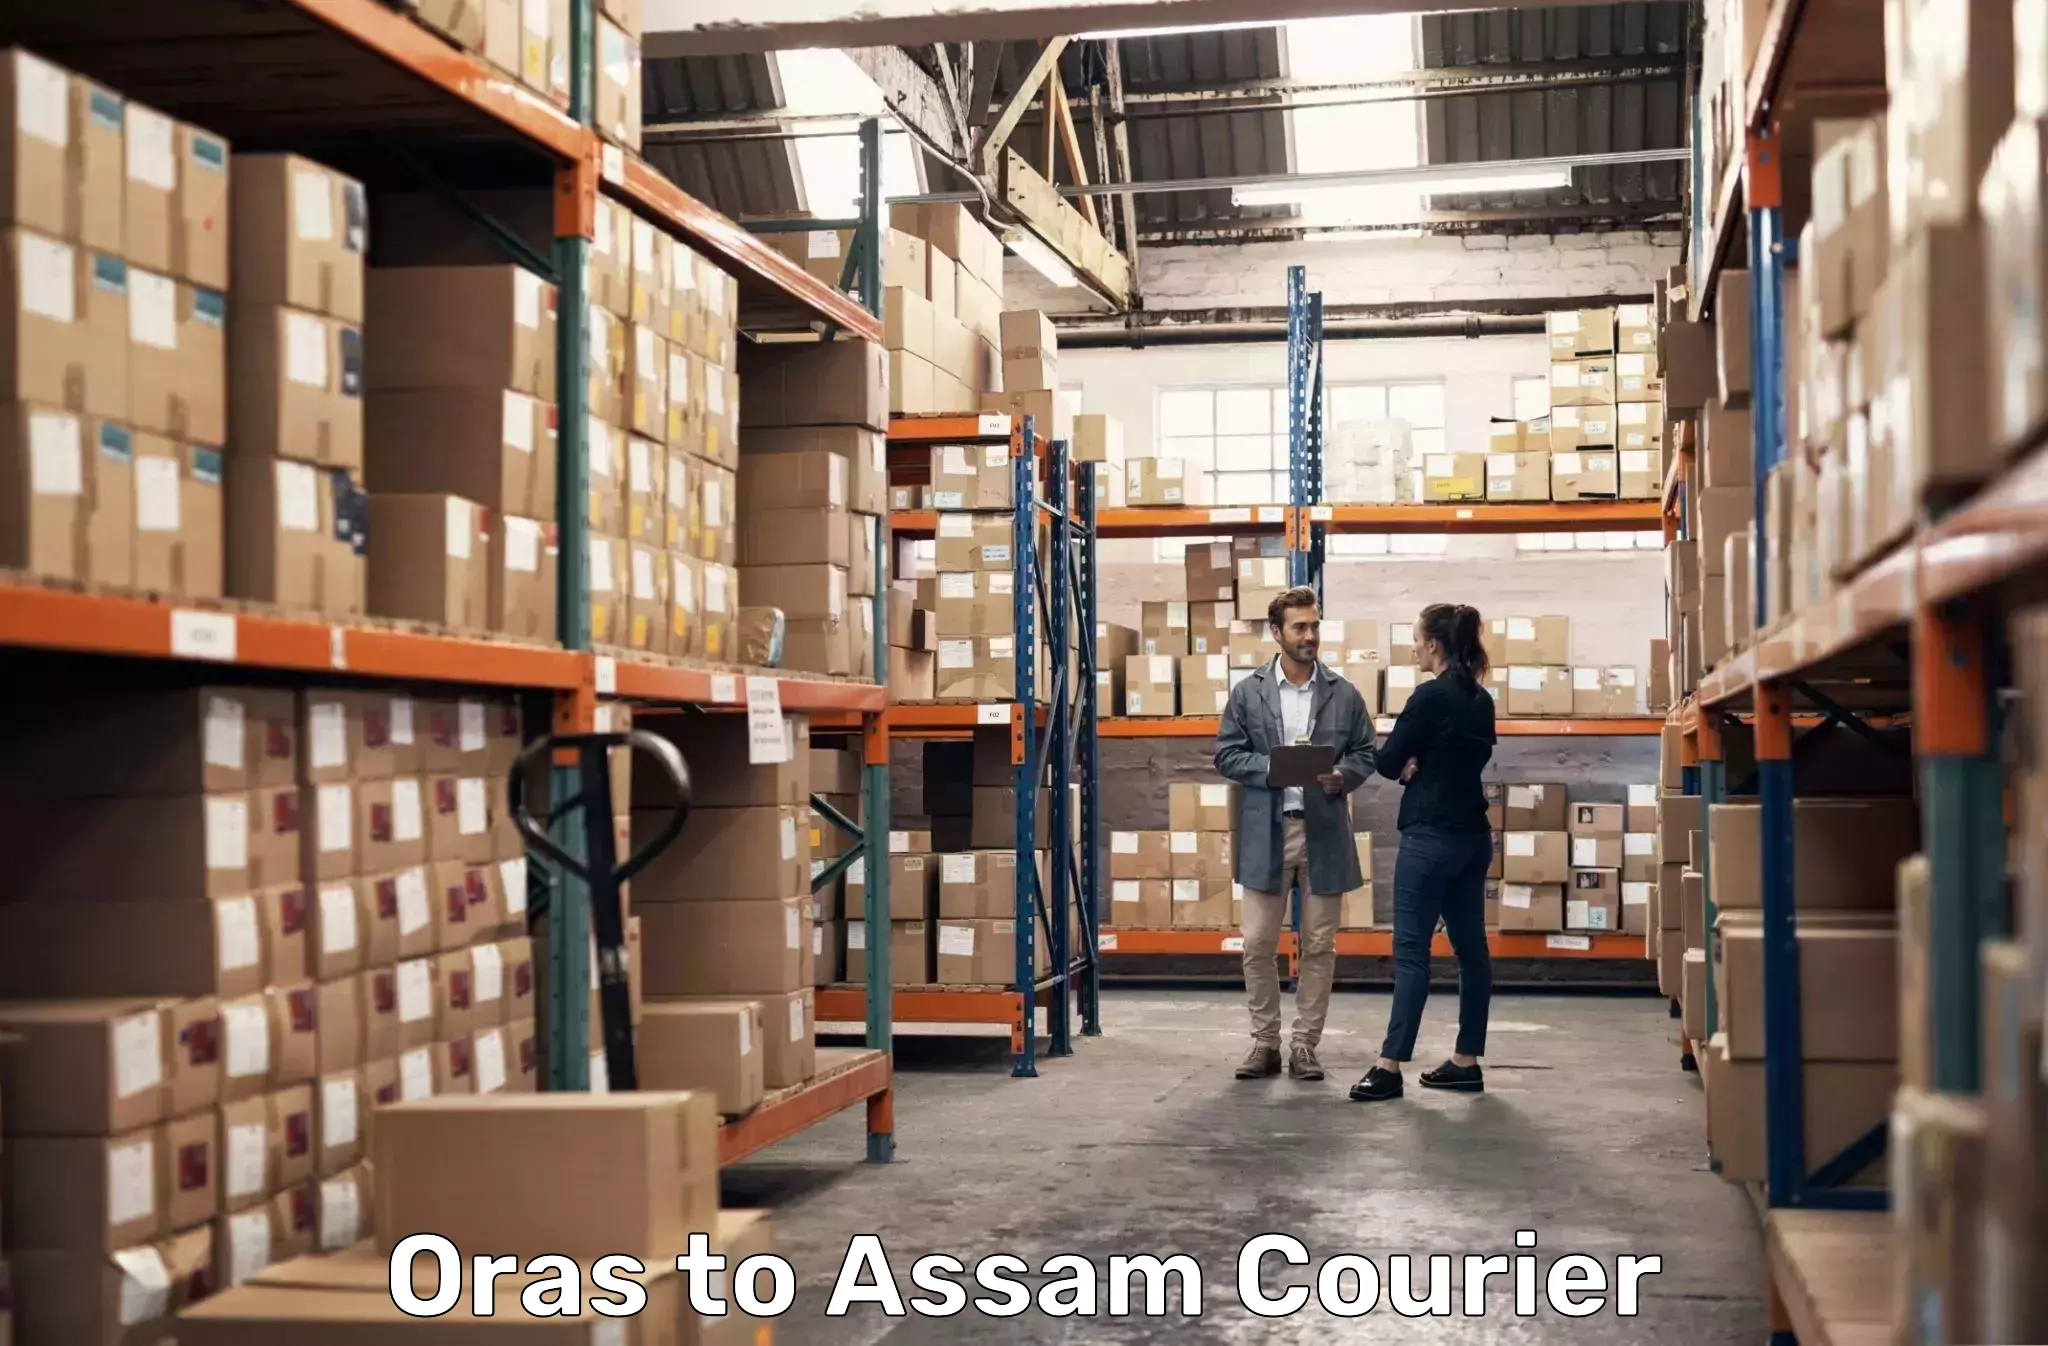 Package delivery network Oras to Assam